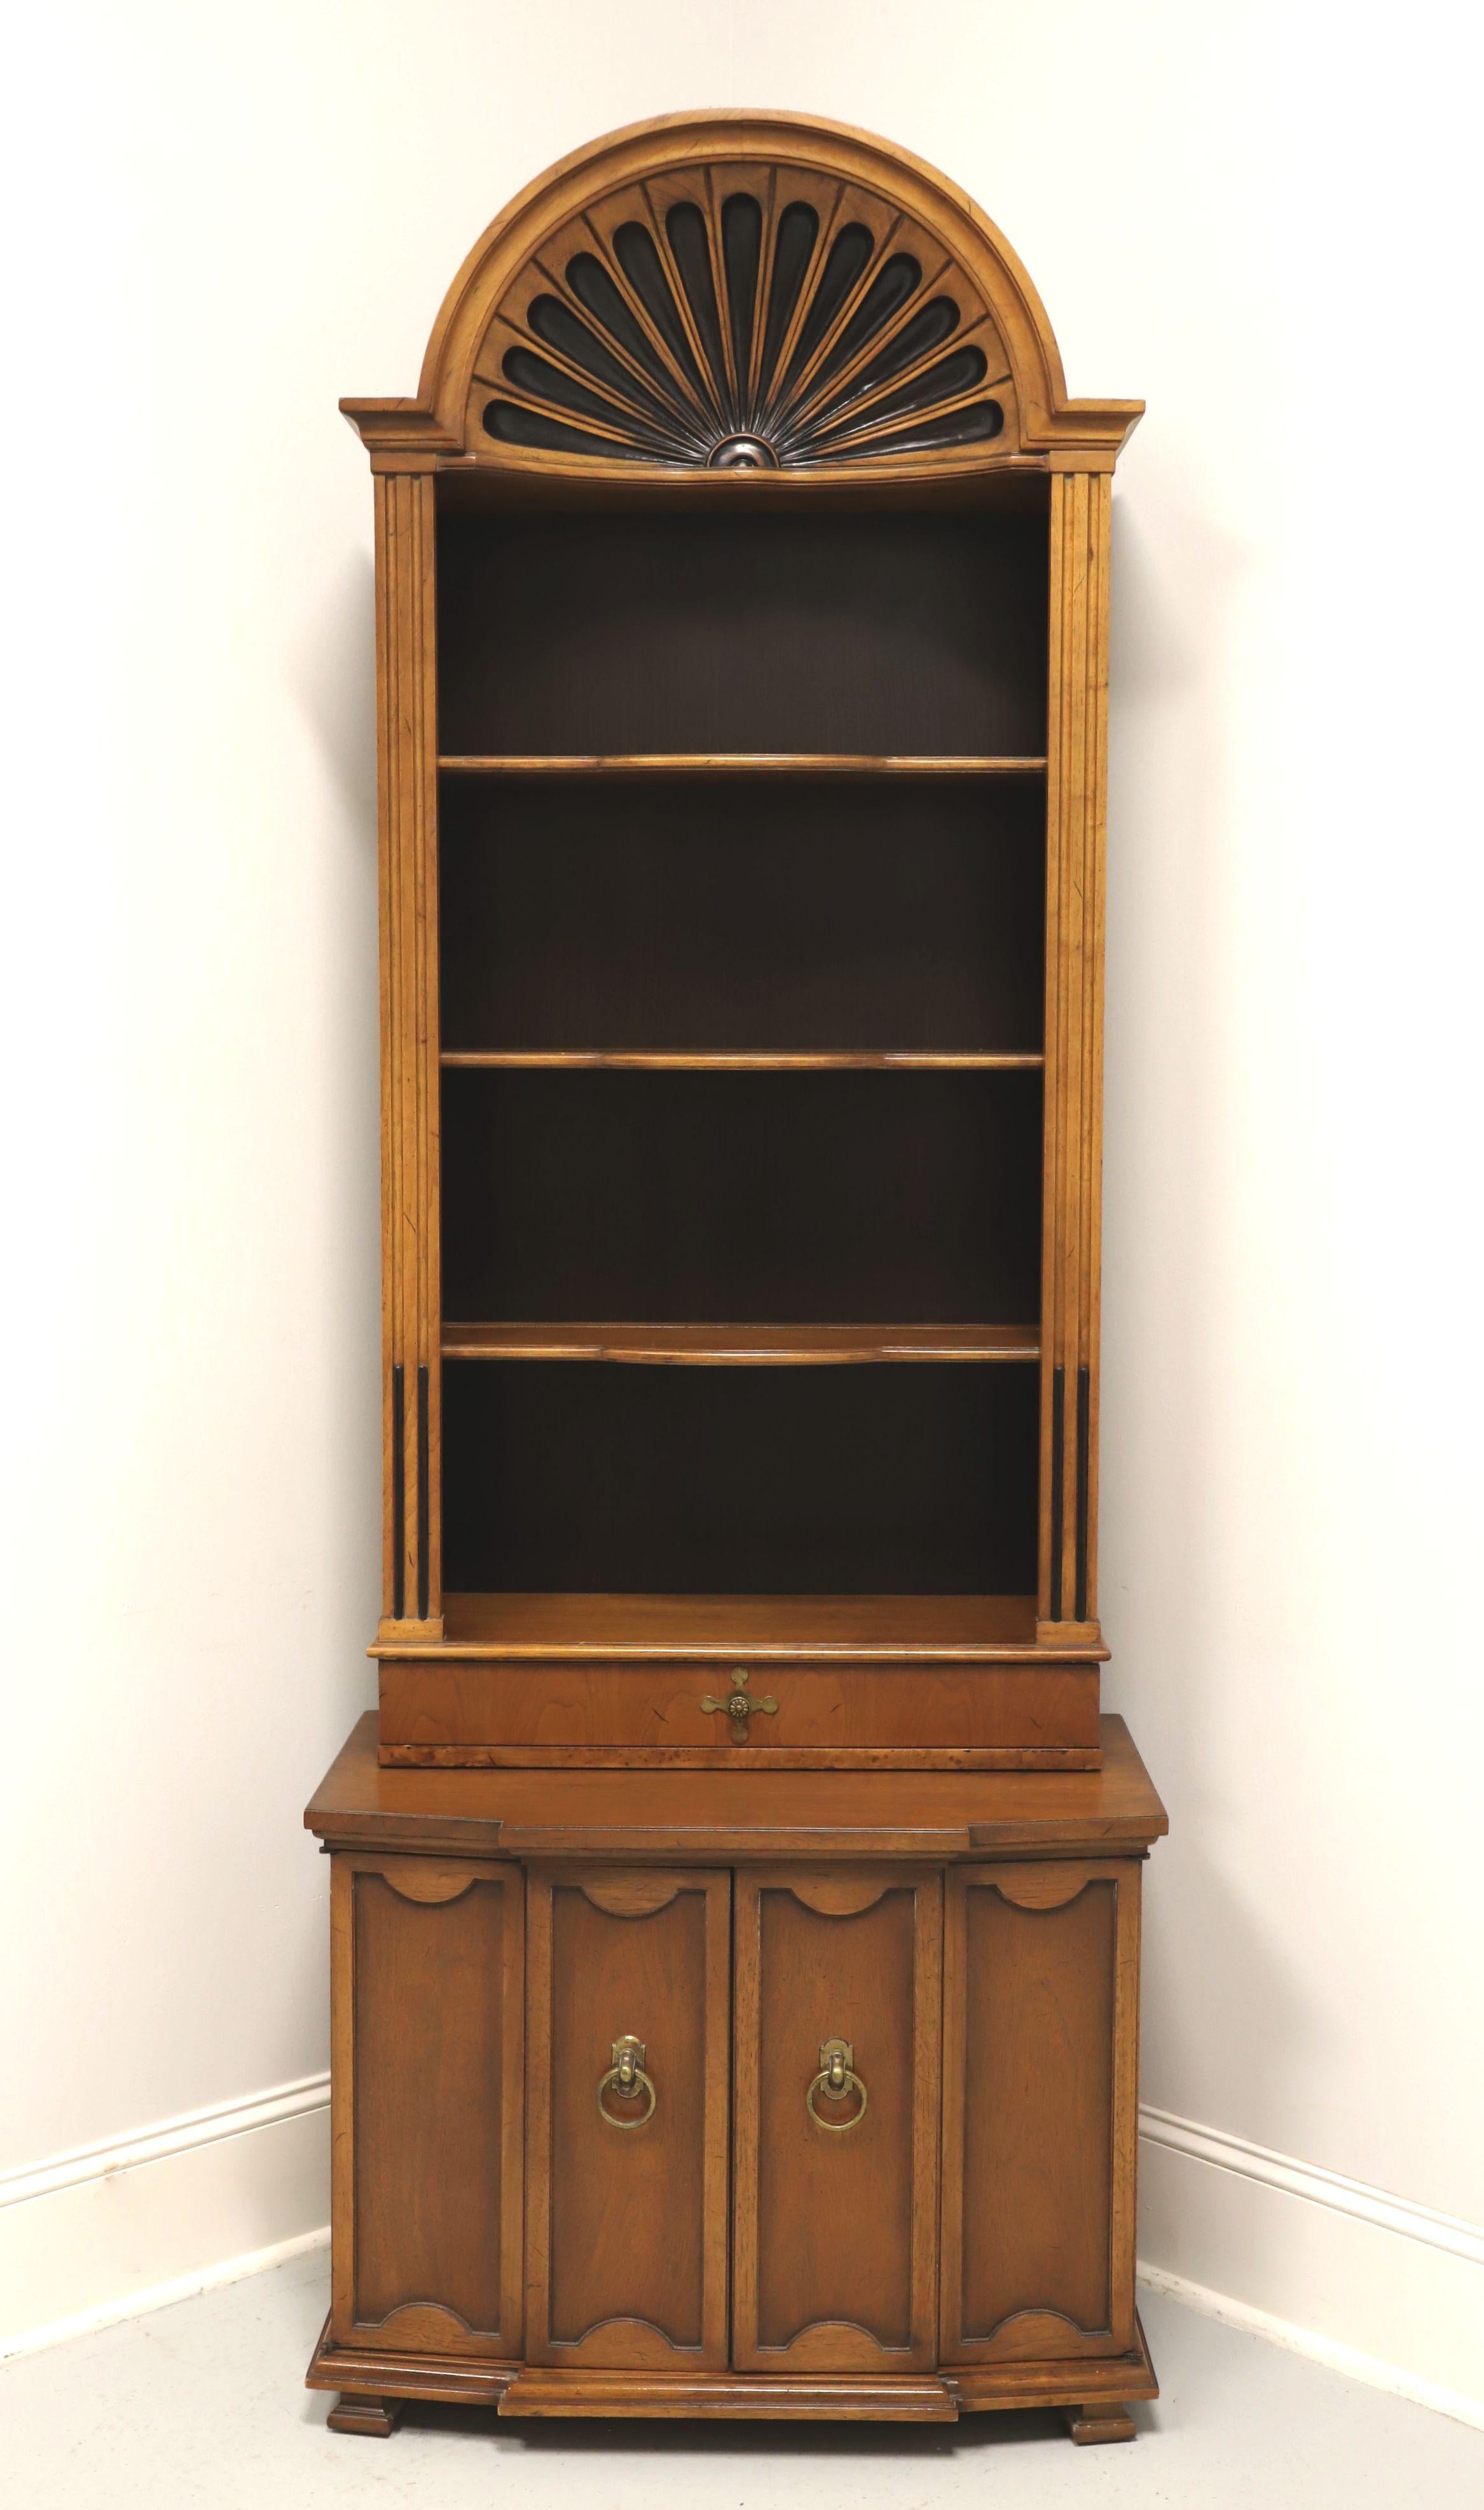 A Neoclassical style console cabinet with arched bookcase top by Tomlinson Furniture. Walnut with their Tokay finish, slight distressing and brass hardware. Features upper open bookcase with carved arch top, three fixed plate grooved wood shelves